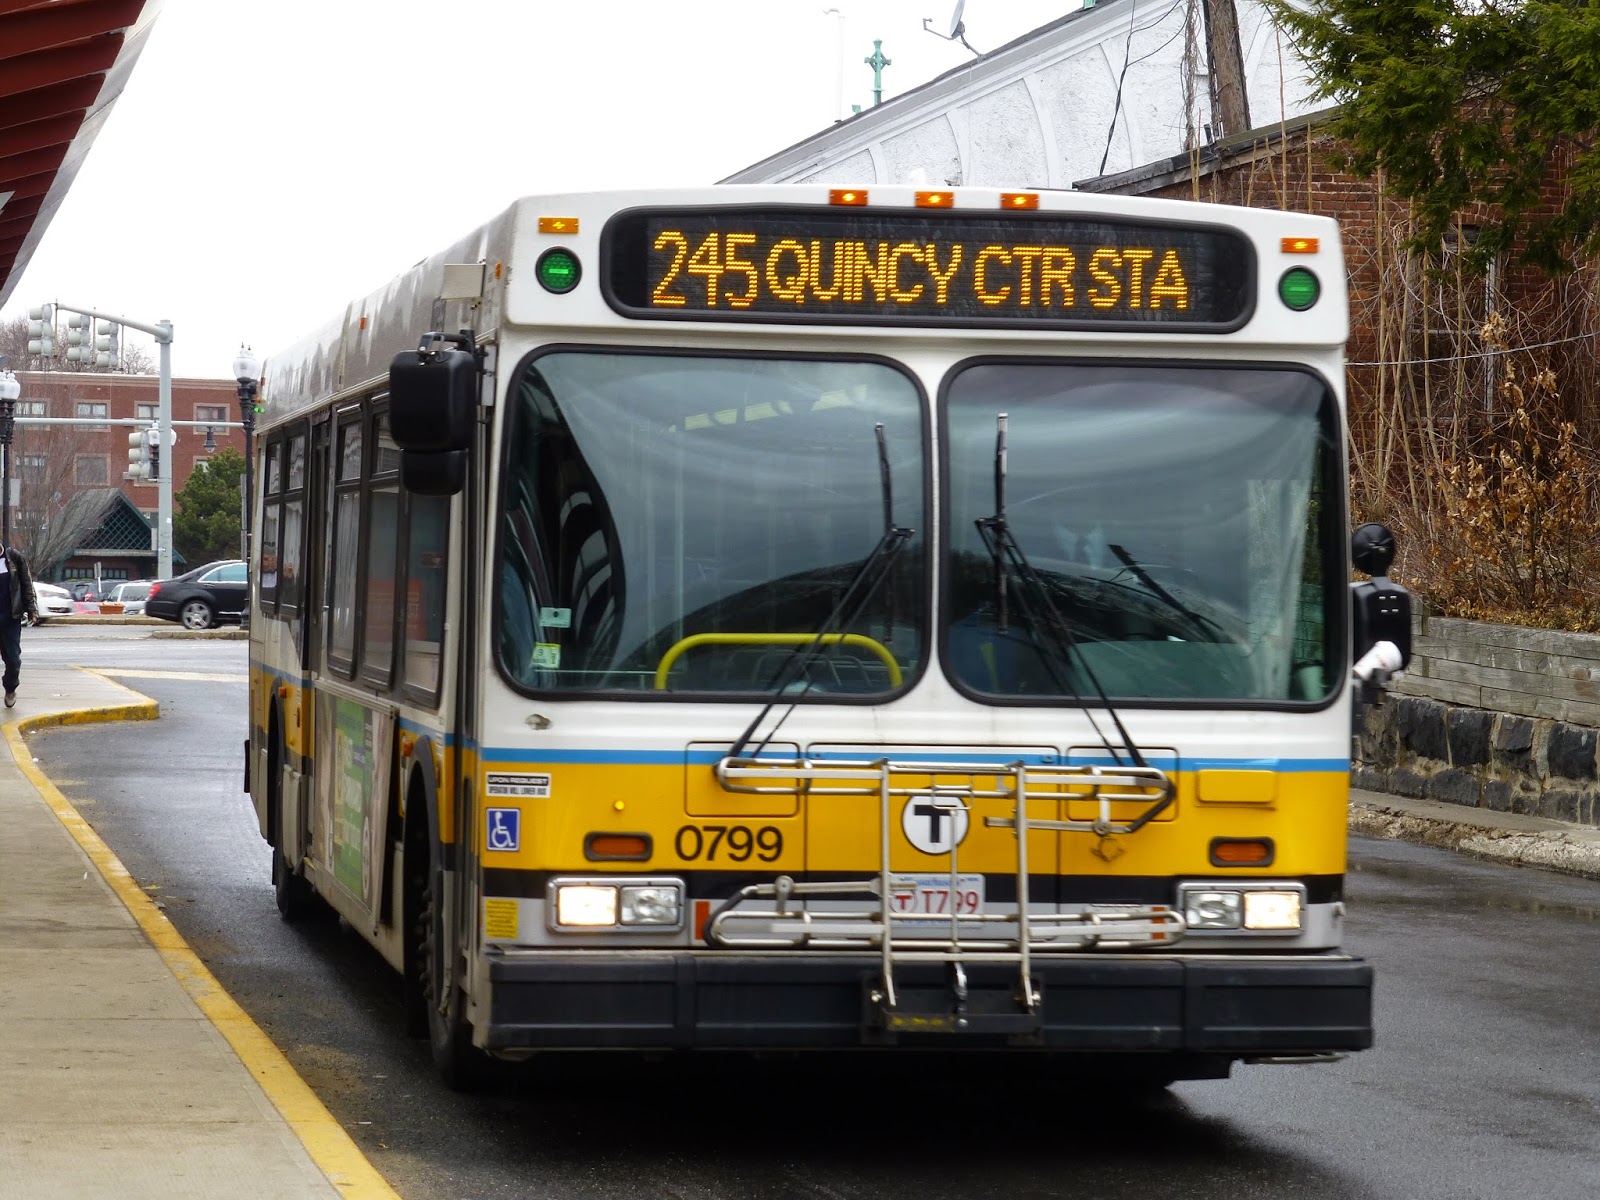 245 (Quincy Center Station – Mattapan Station via Quincy Hospital and Pleasant Street)